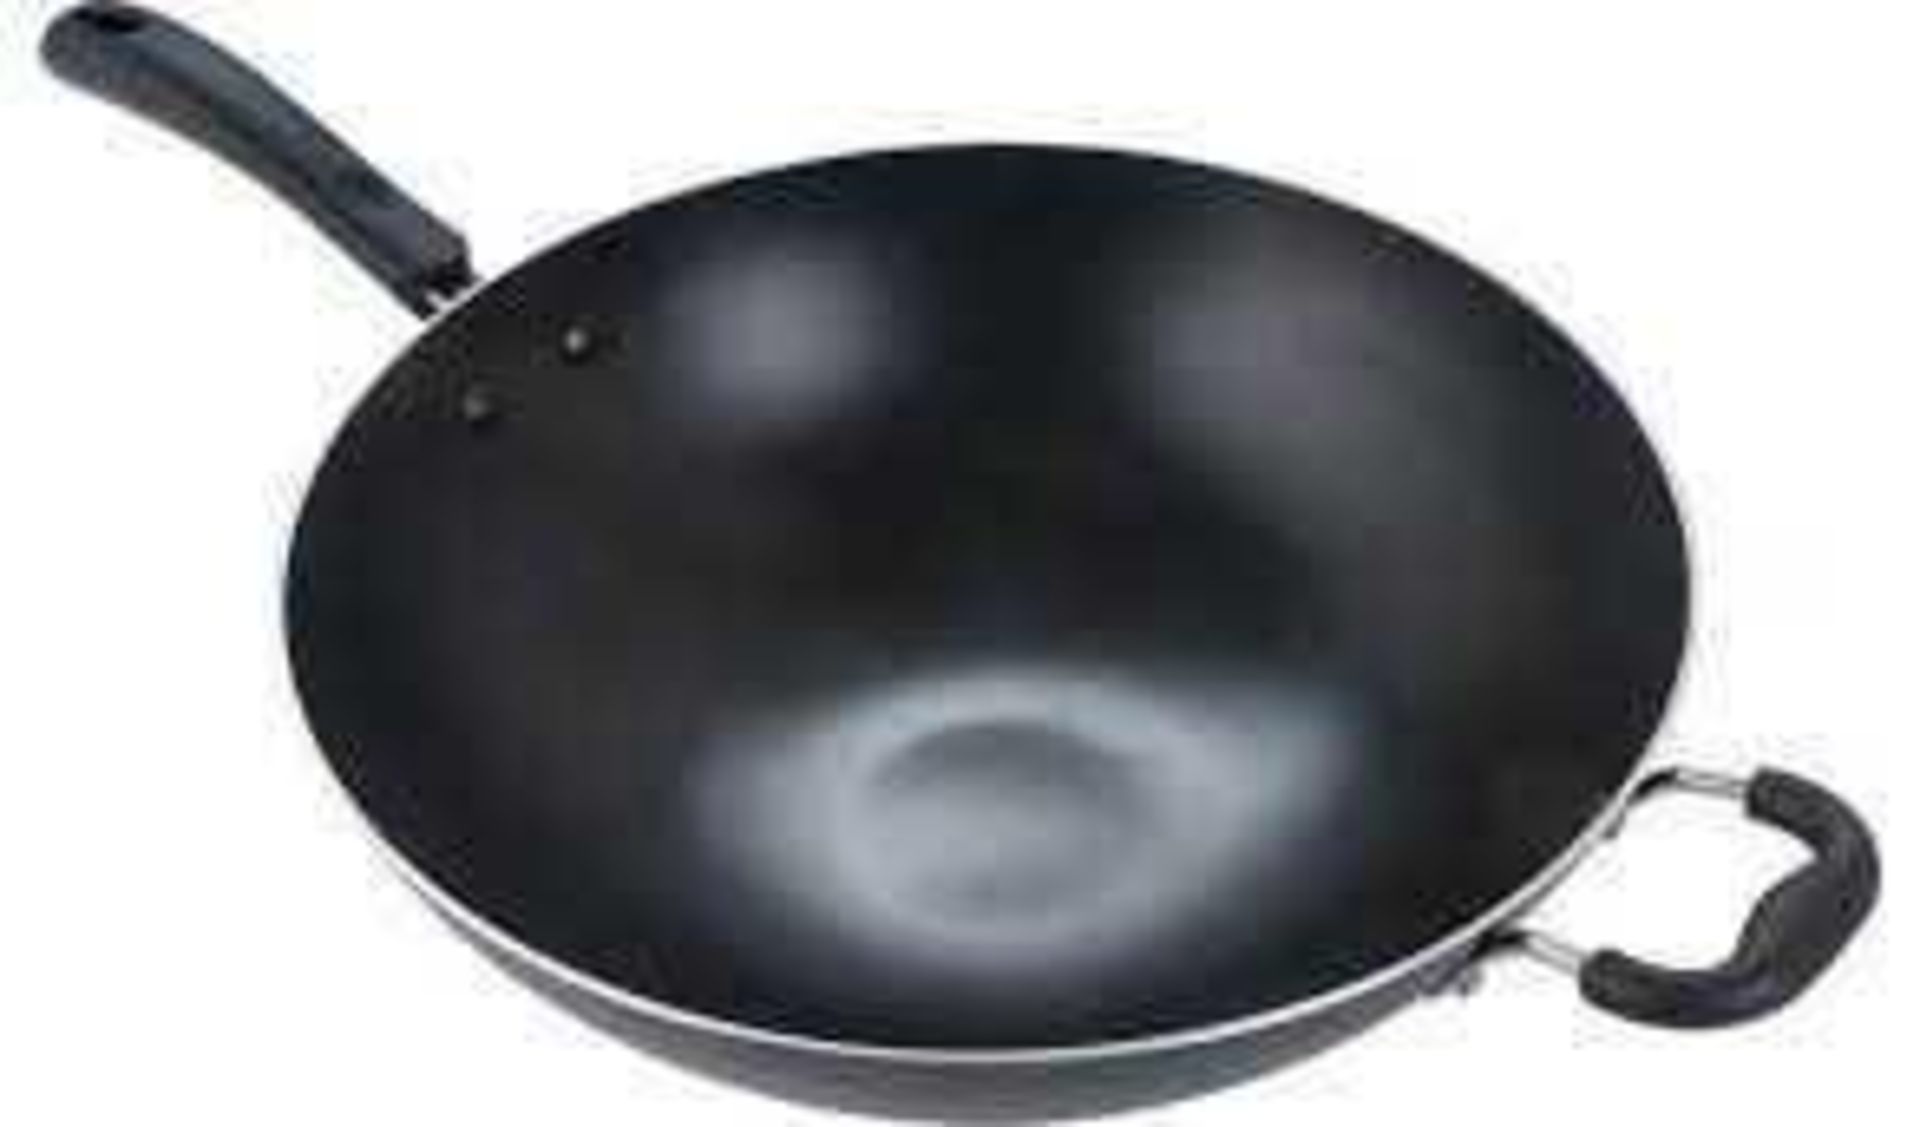 RRP £130 Lot To Contain 4 Assorted Non Stick Cermaic Coated Frying Pans And Woks By Everlast And Ken - Image 2 of 3